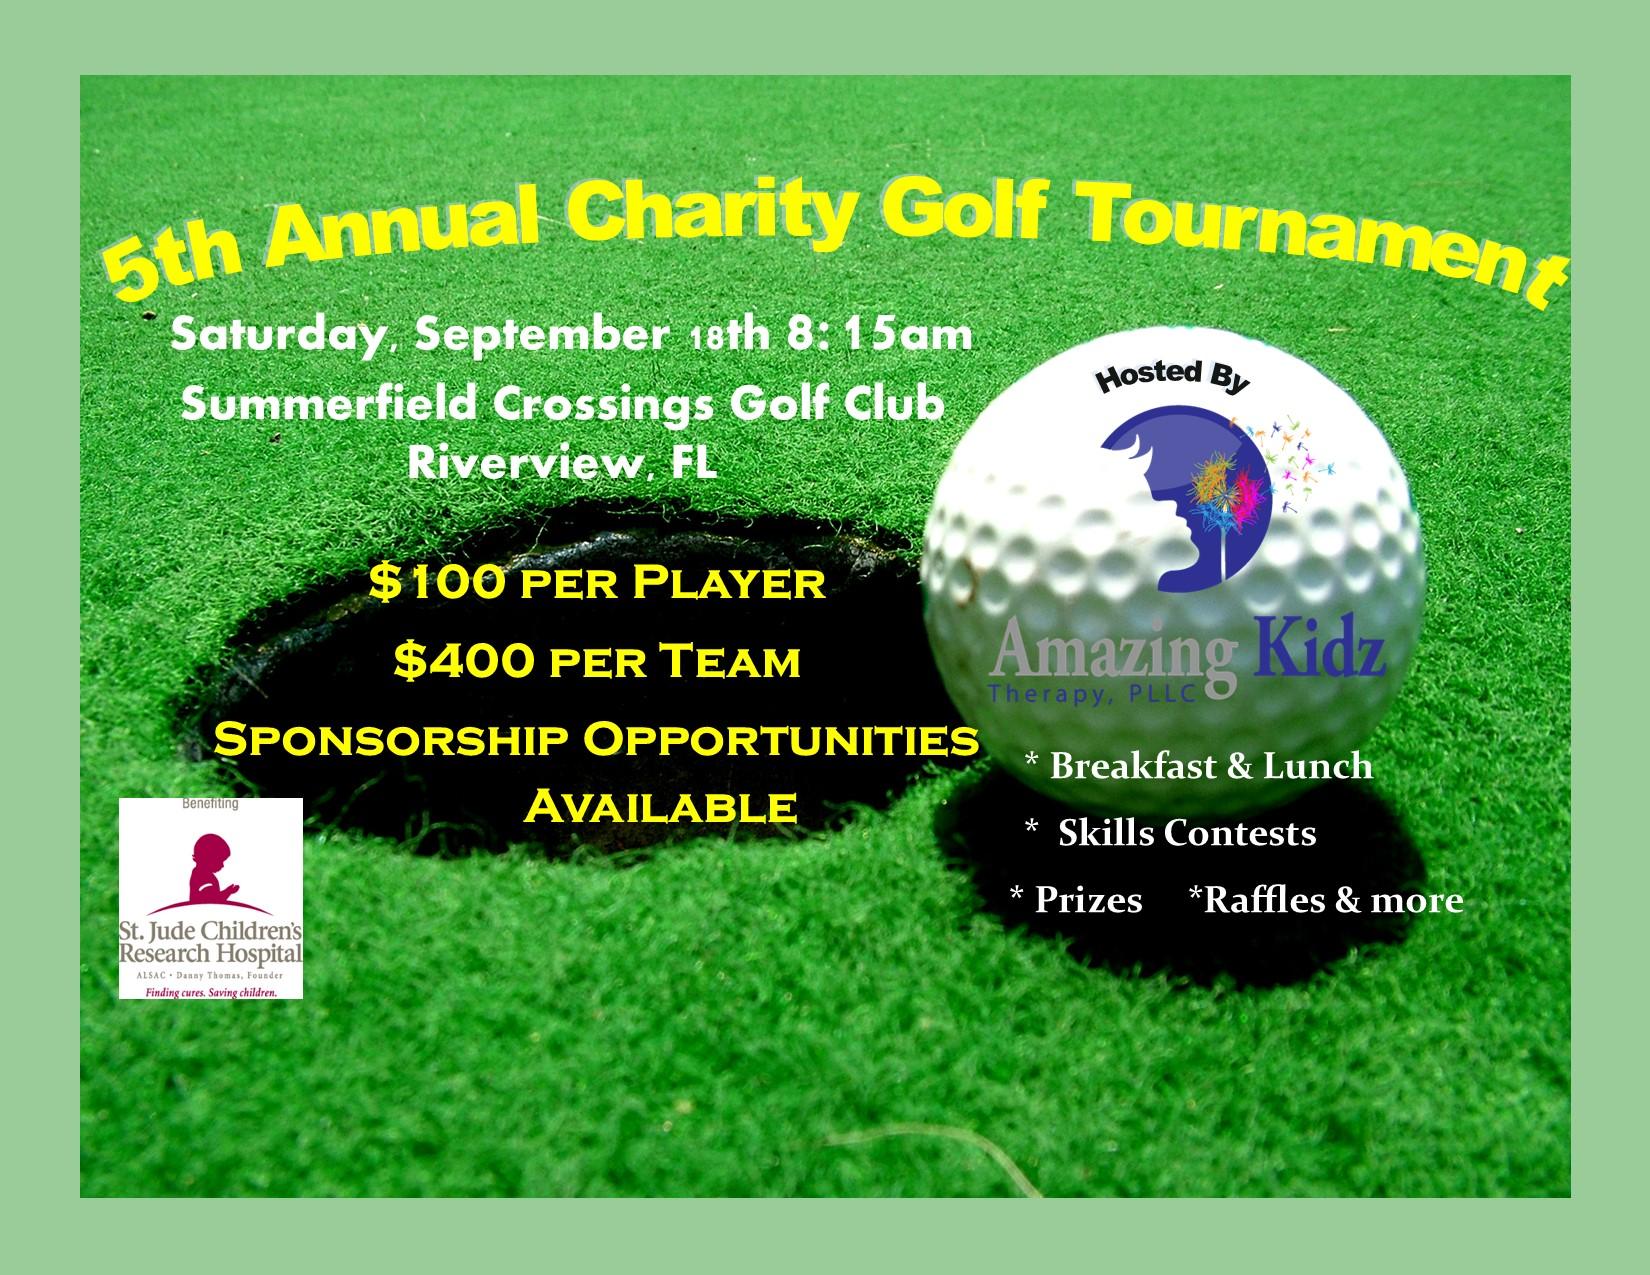 5th Annual Amazing Kidz Therapy Charity Golf Tournament